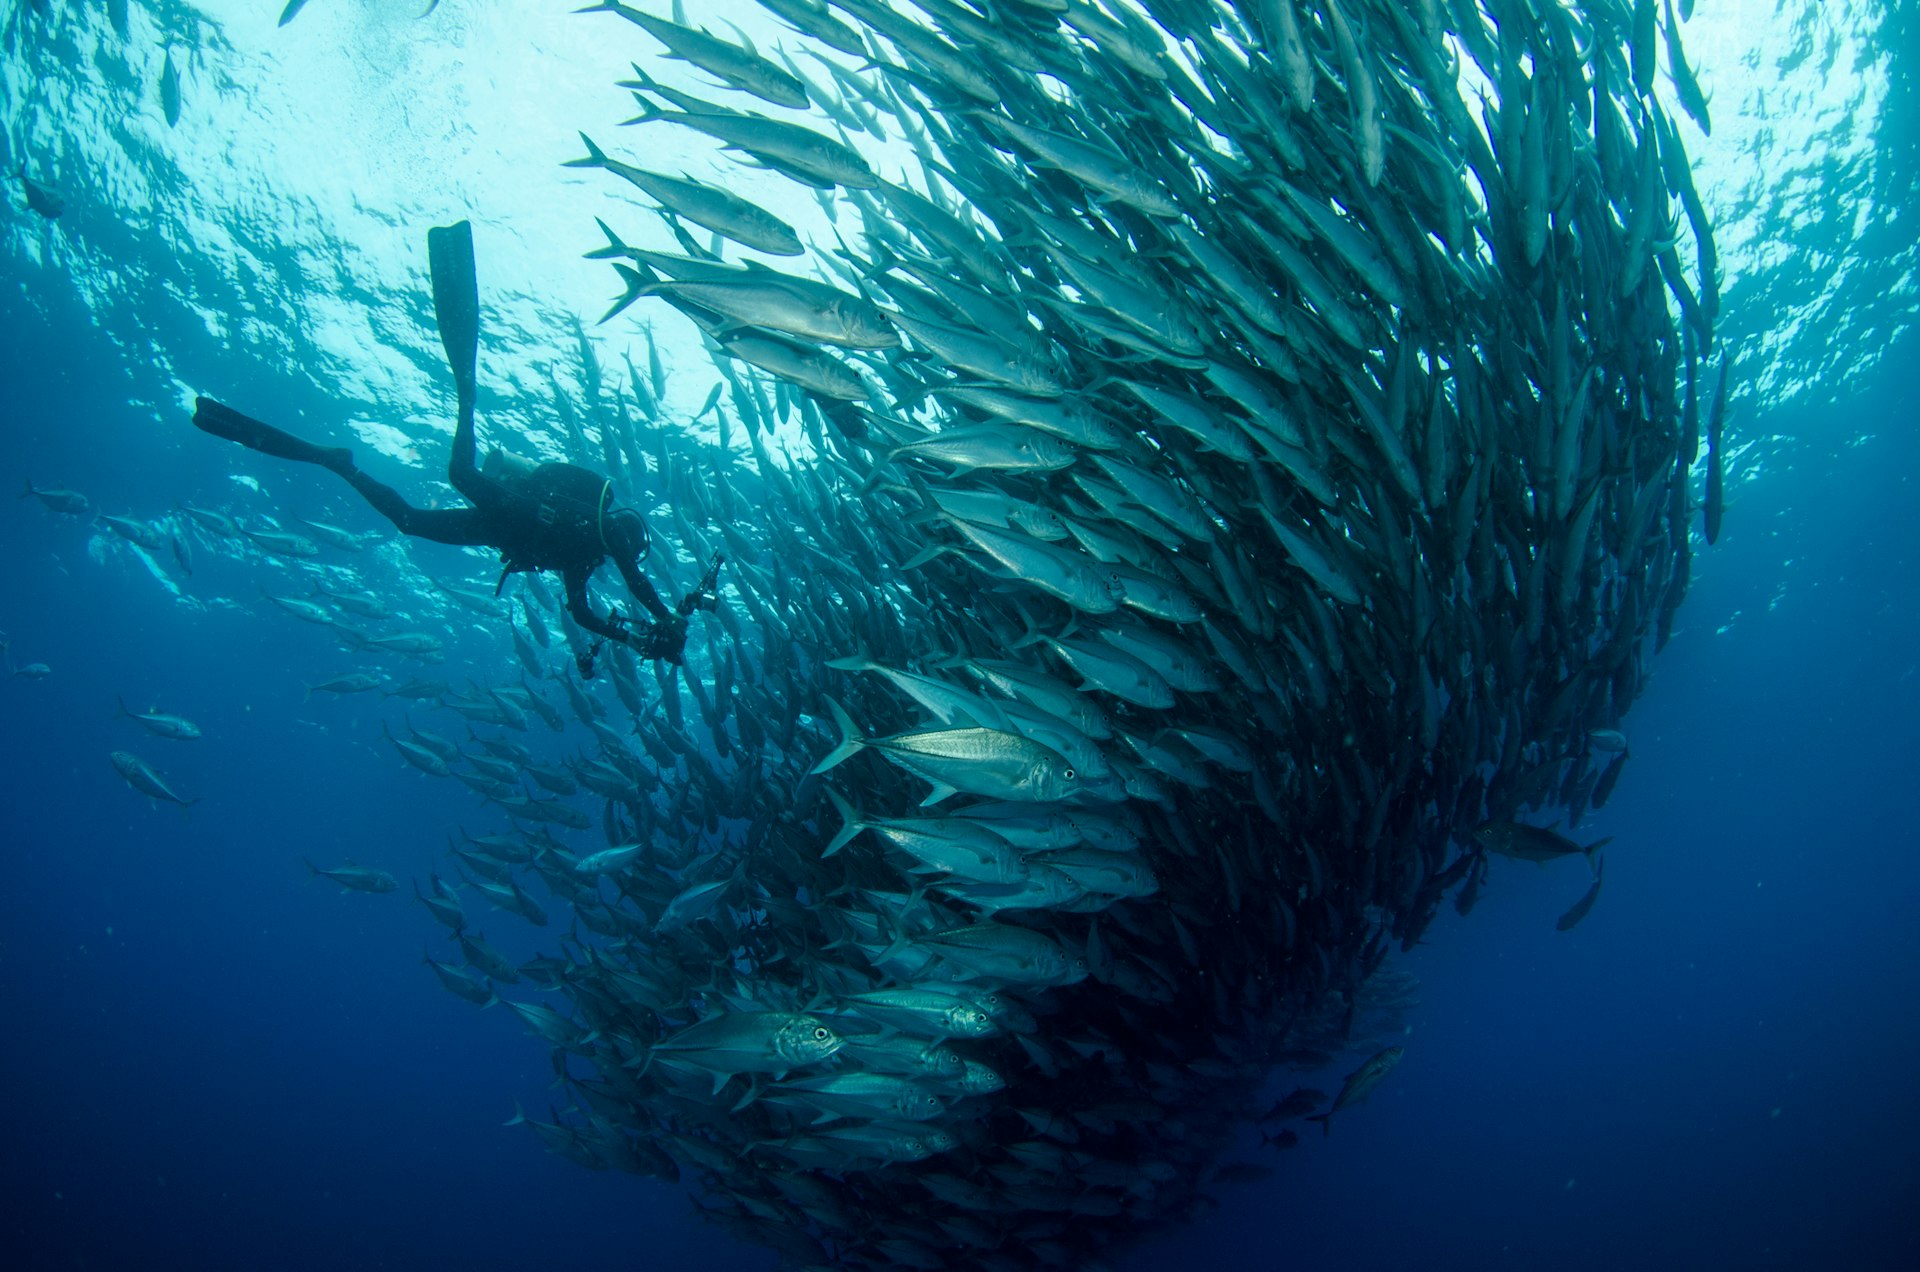 A large school of fish cluster together as a diver photographs them